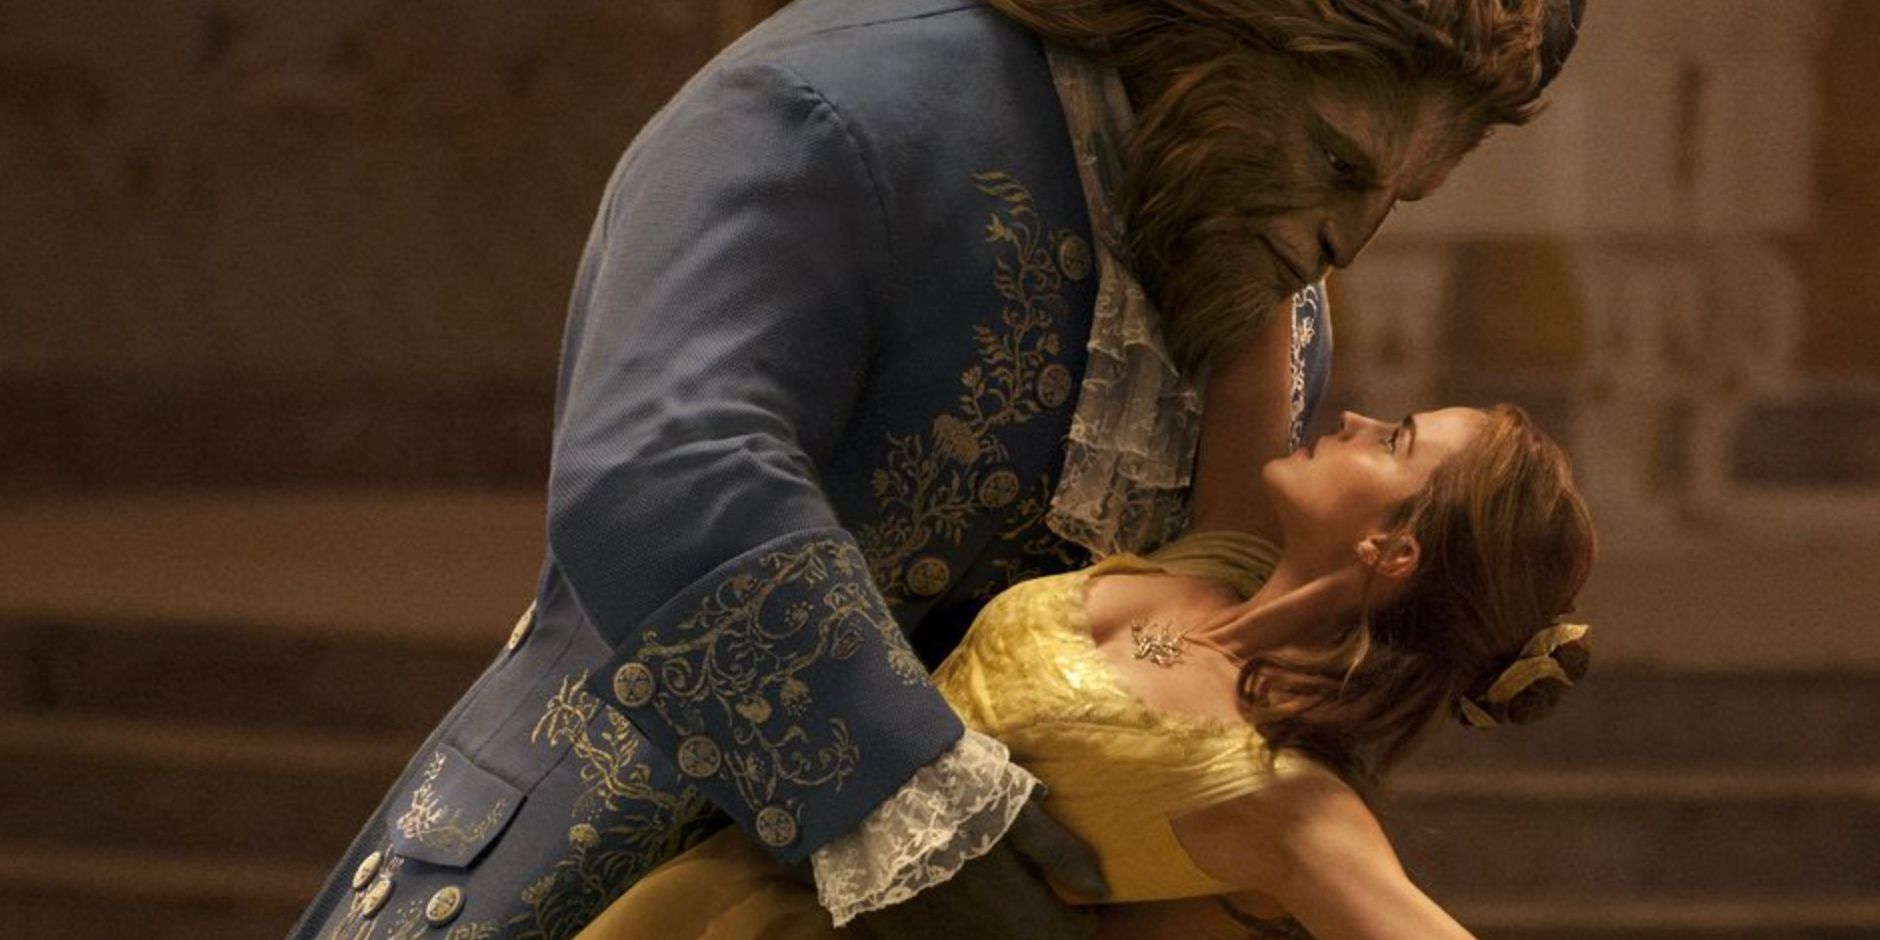 Belle and the Beast dance in the live action Beauty and the Beast